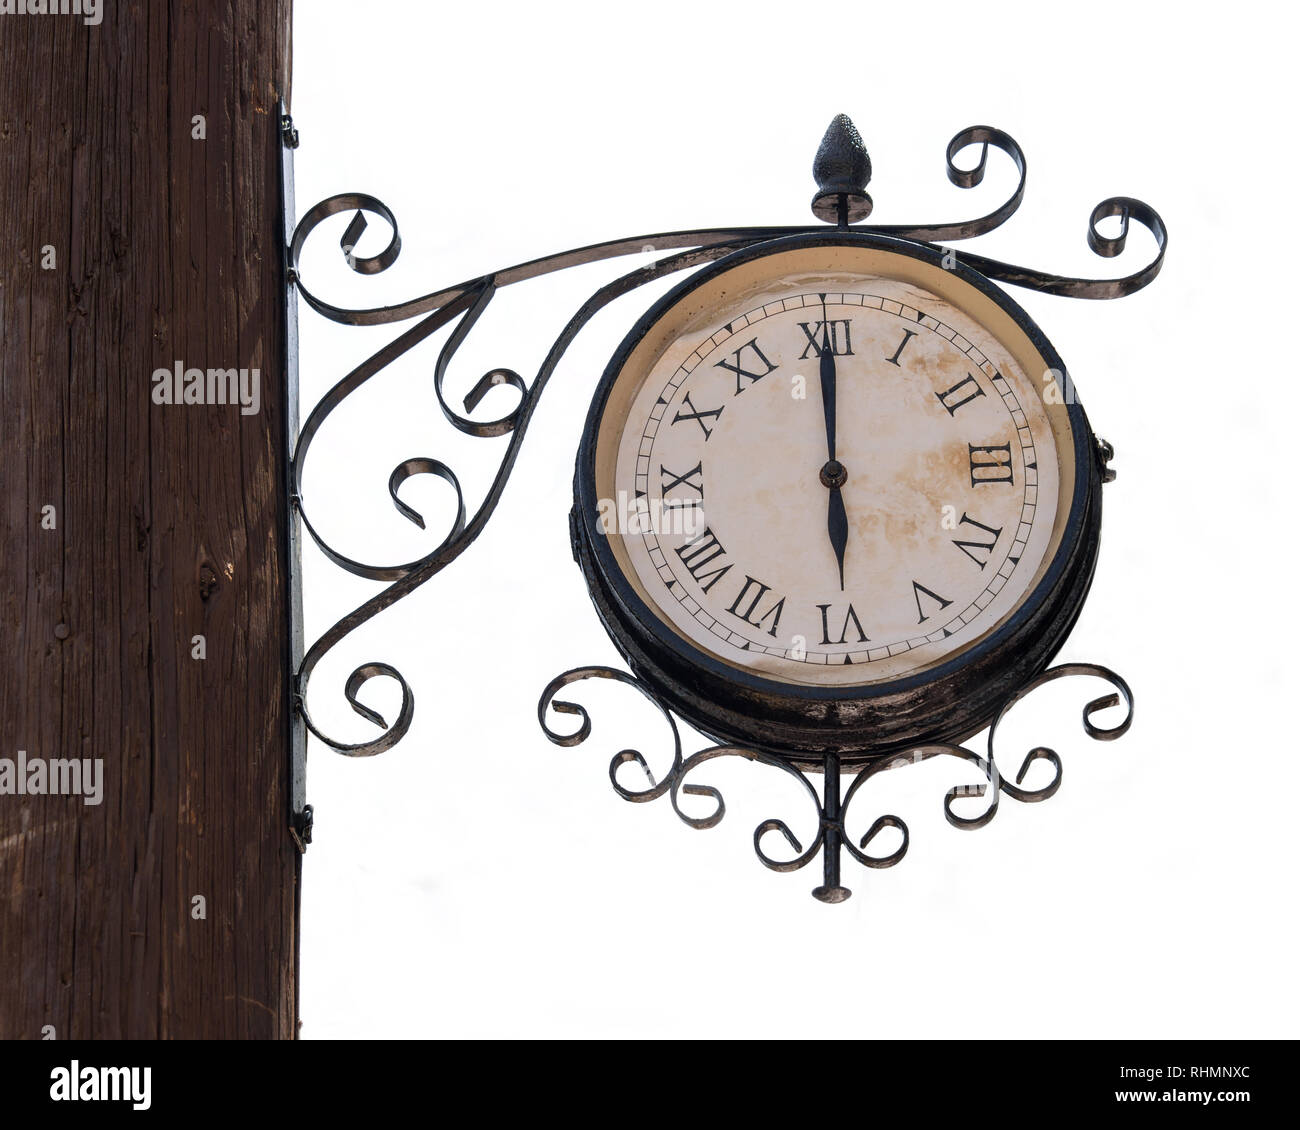 Vintage street clock on a wooden pole isolated on white background Stock Photo